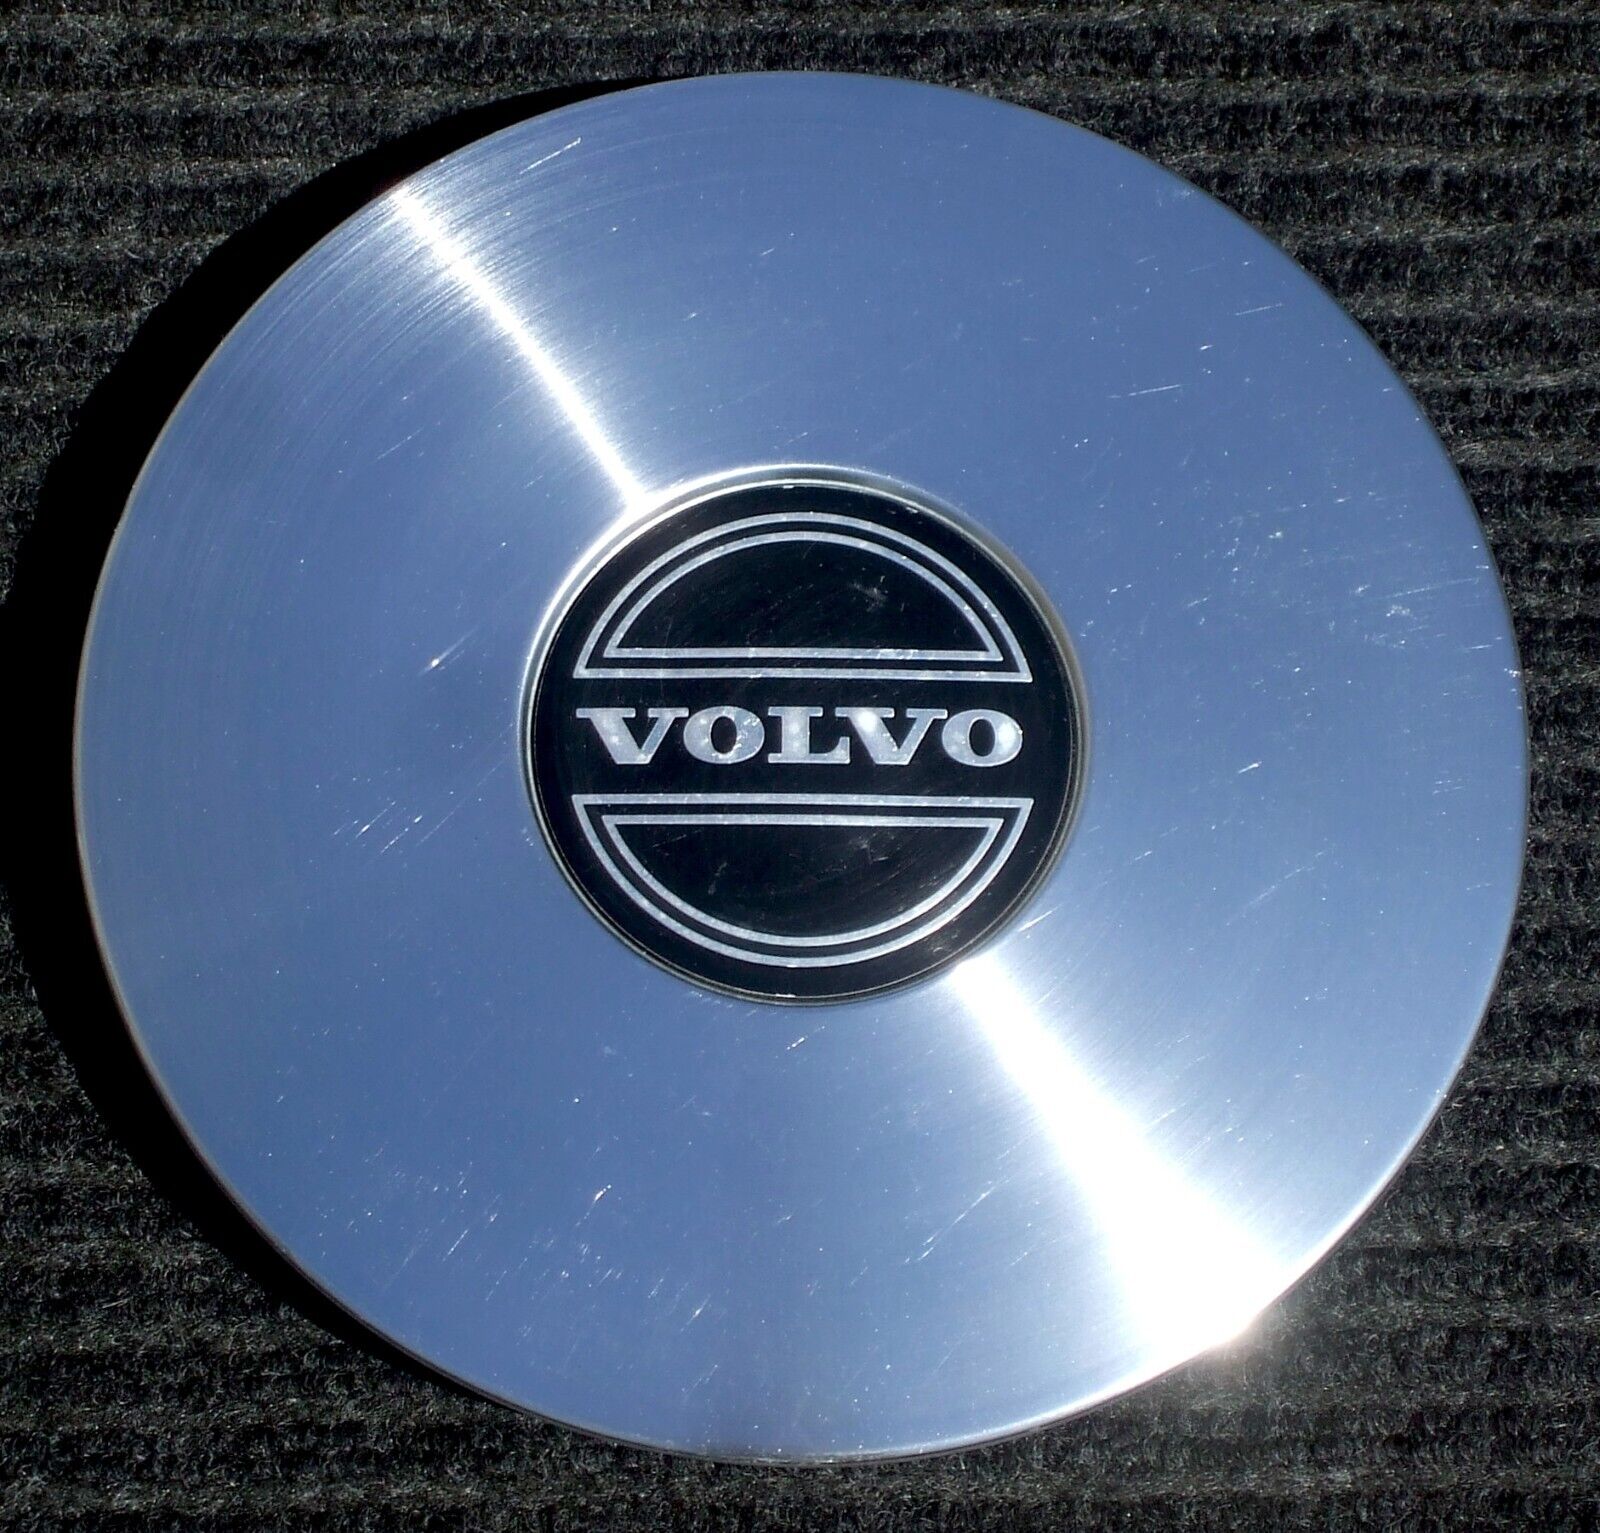 One Genuine Volvo 740 GLE Center Cap Hubcap For 14